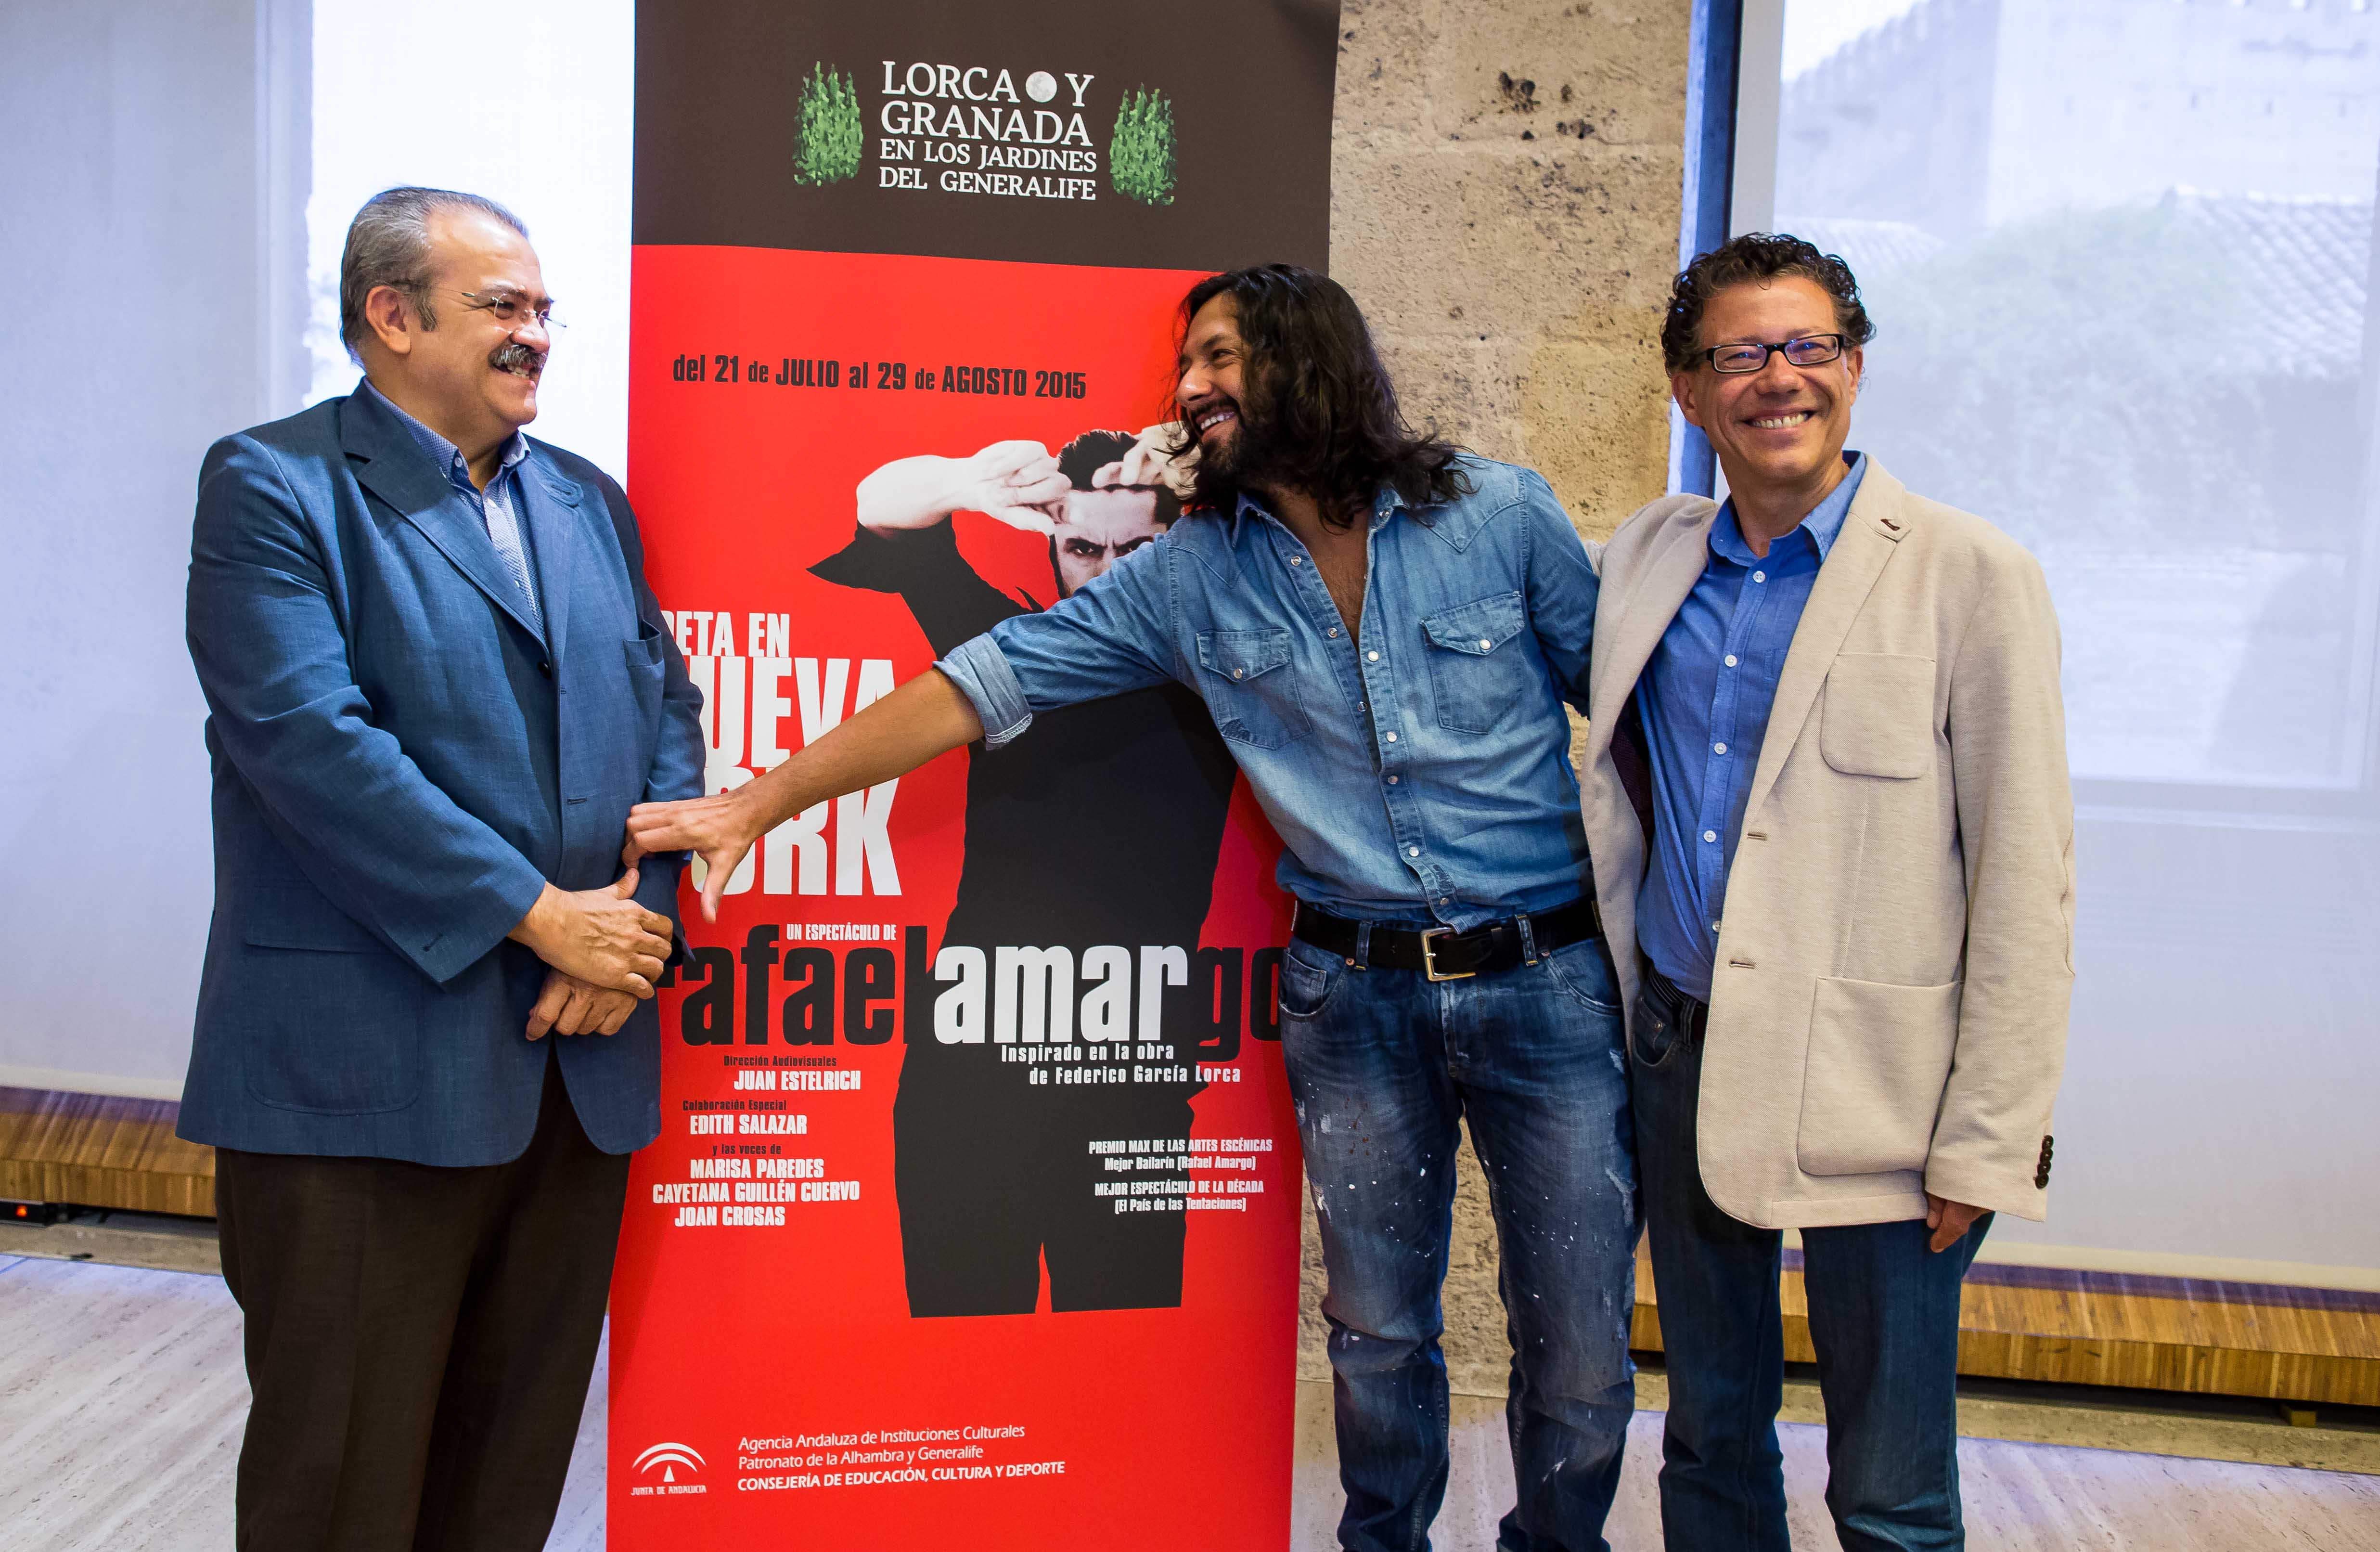 Over 40,100 spectators have flocked to the generalife theatre to see poet in new york by Rafael Amargo